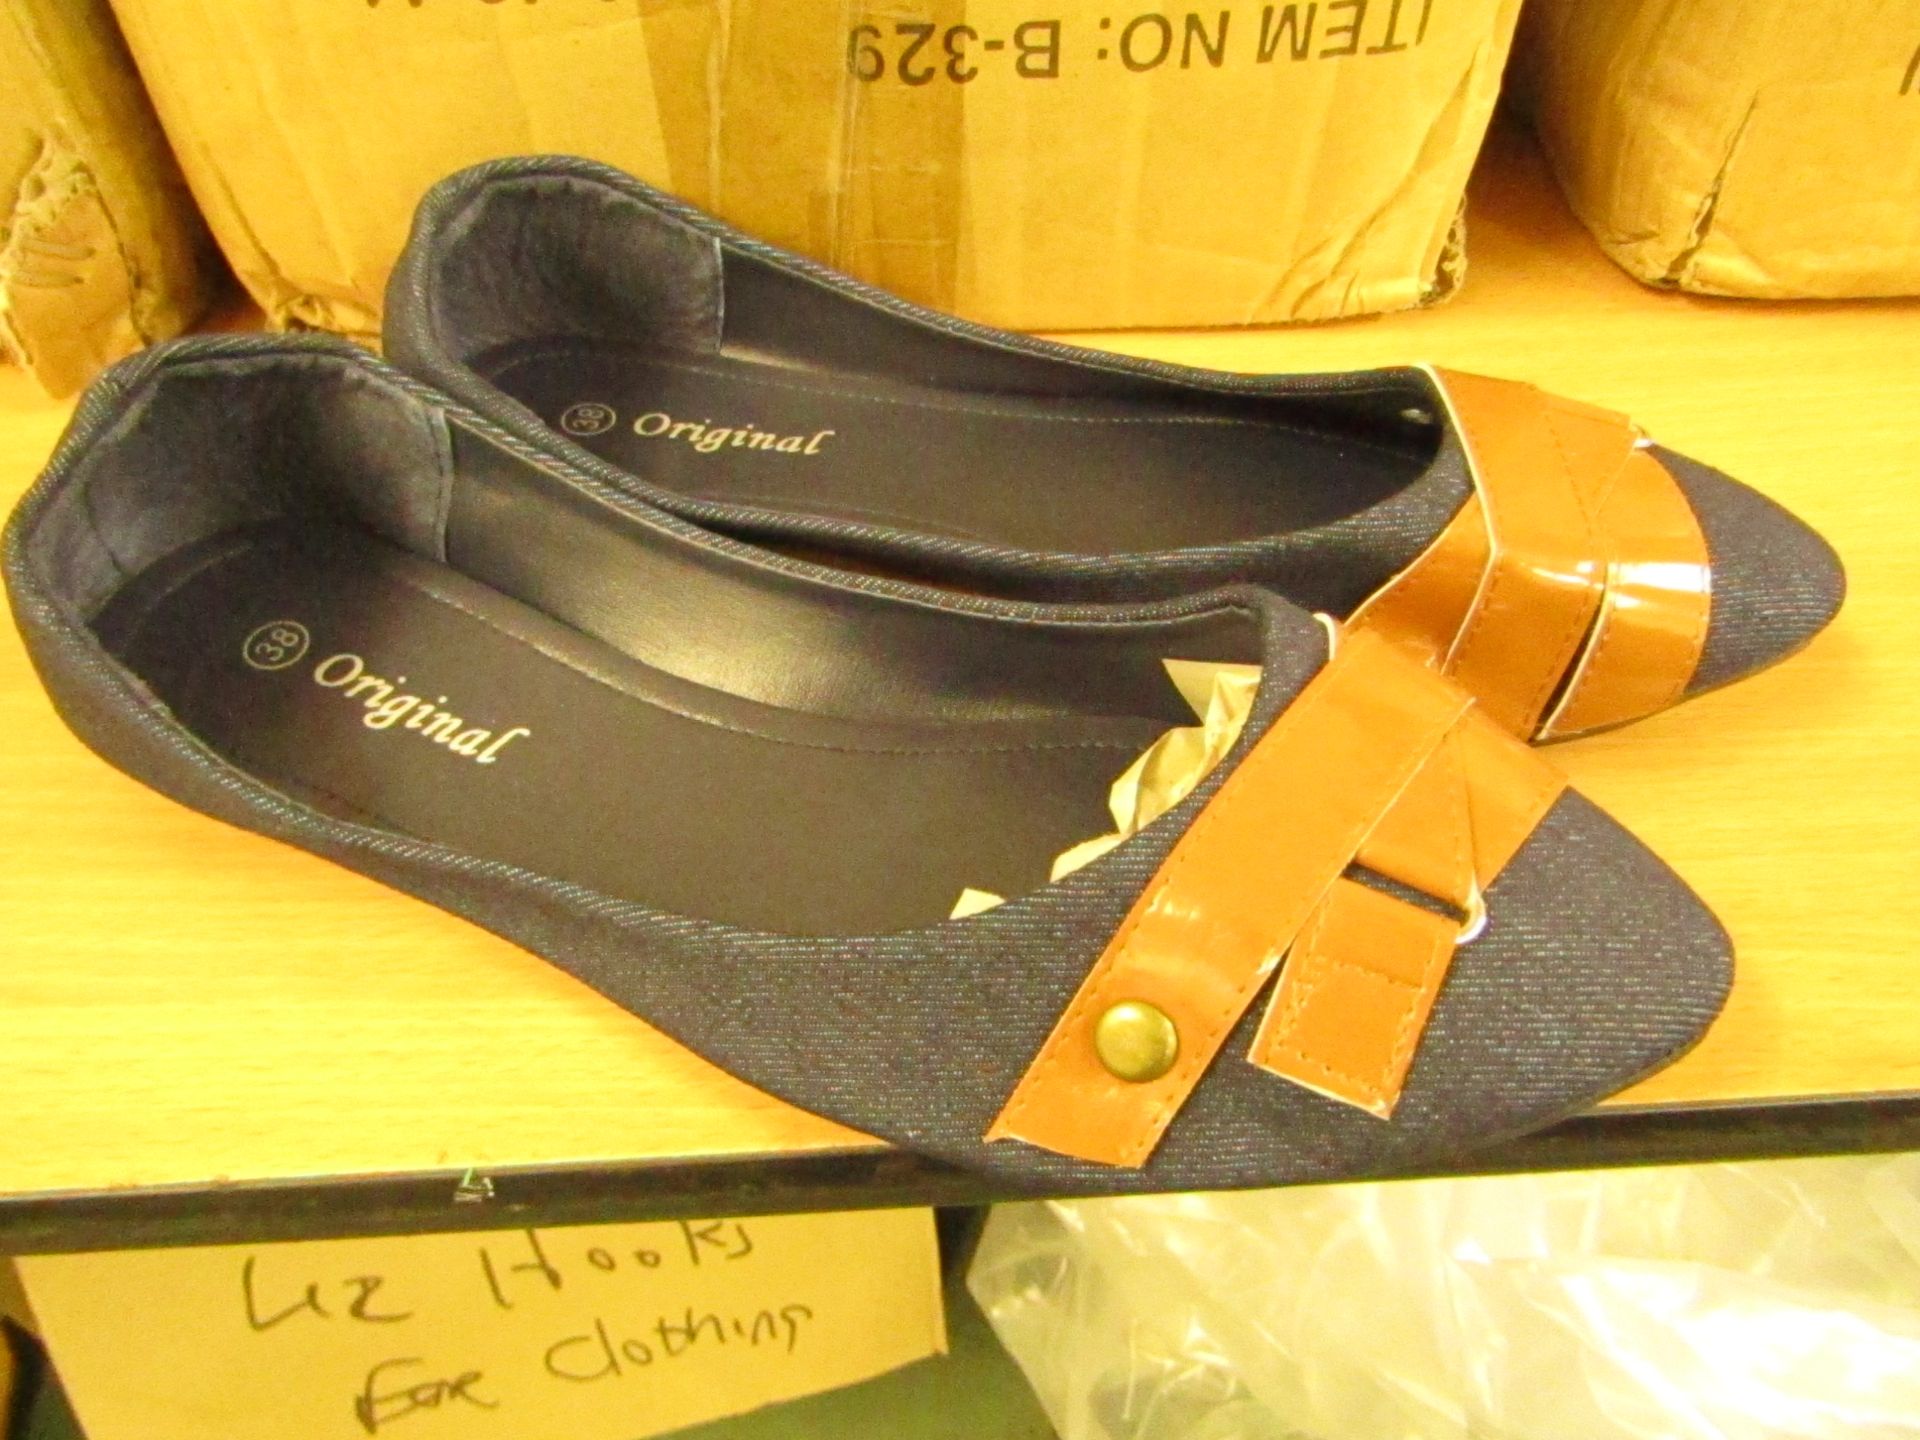 3x Pairs of Ladies Dolly Shoes - Blue with Brown Band - Size 40 - Size 7.5 - New & Packaged